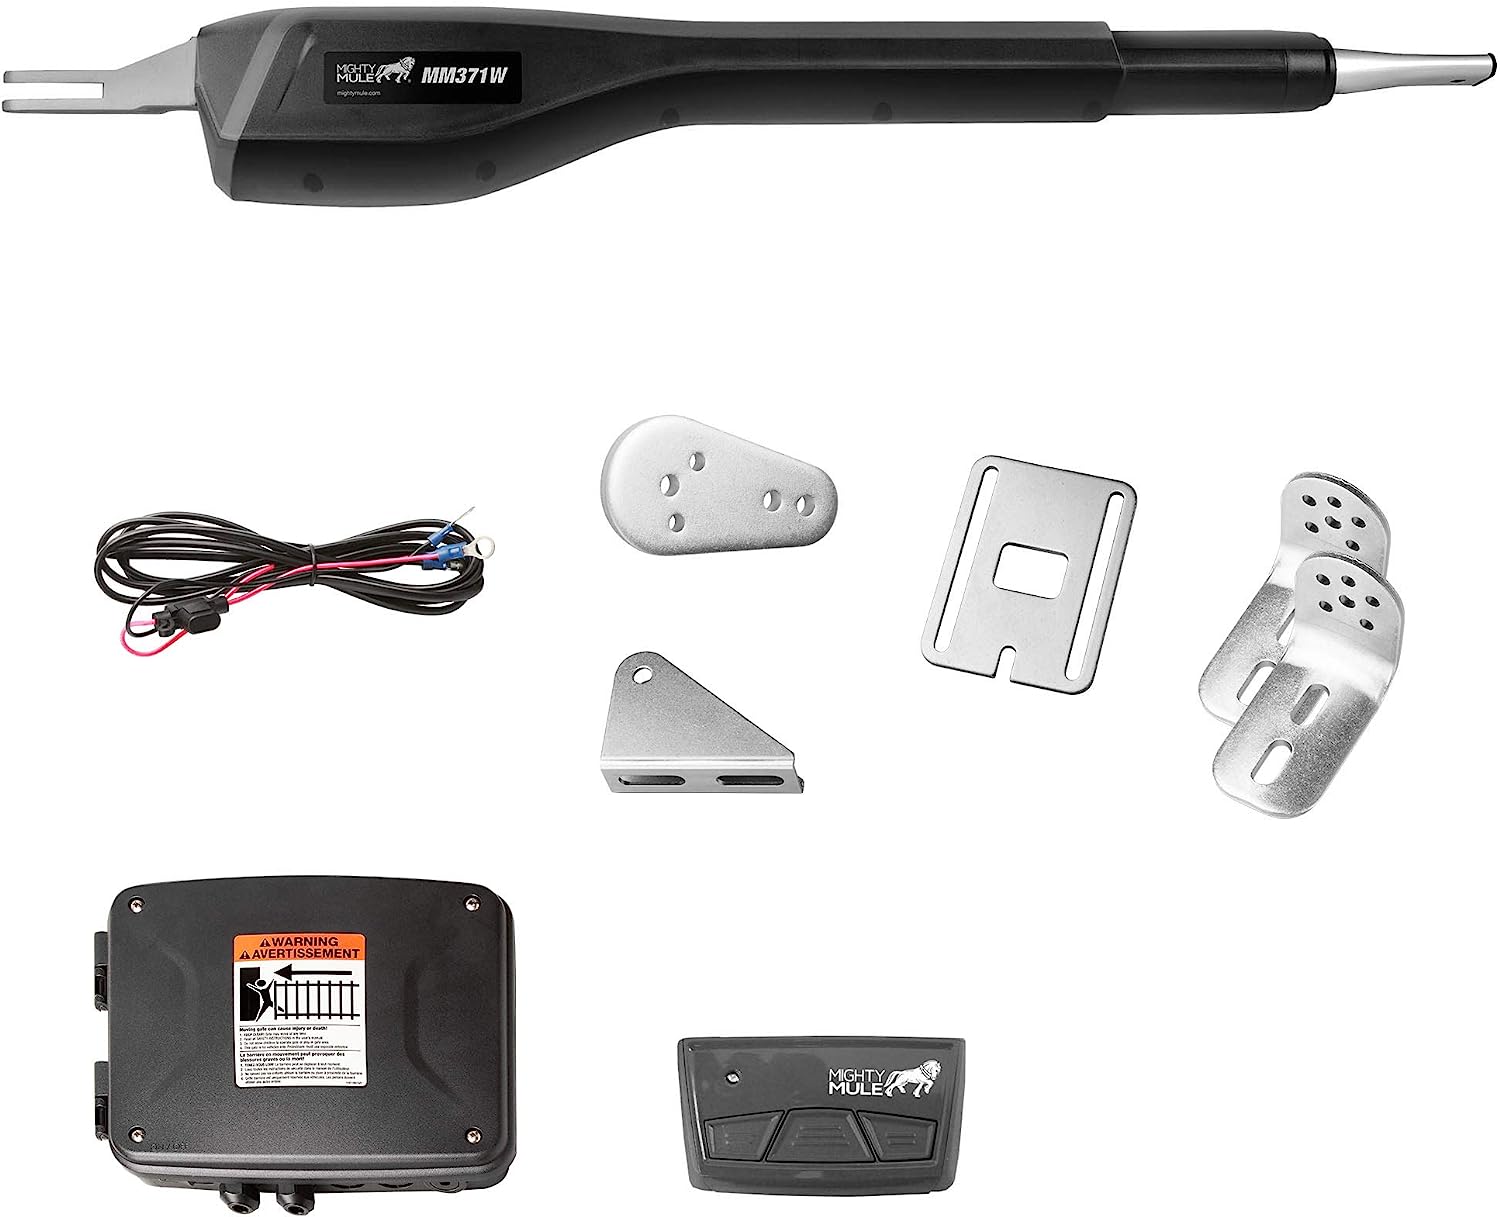 Mighty Mule MM371W Automatic Gate Opener (SMART), [...]